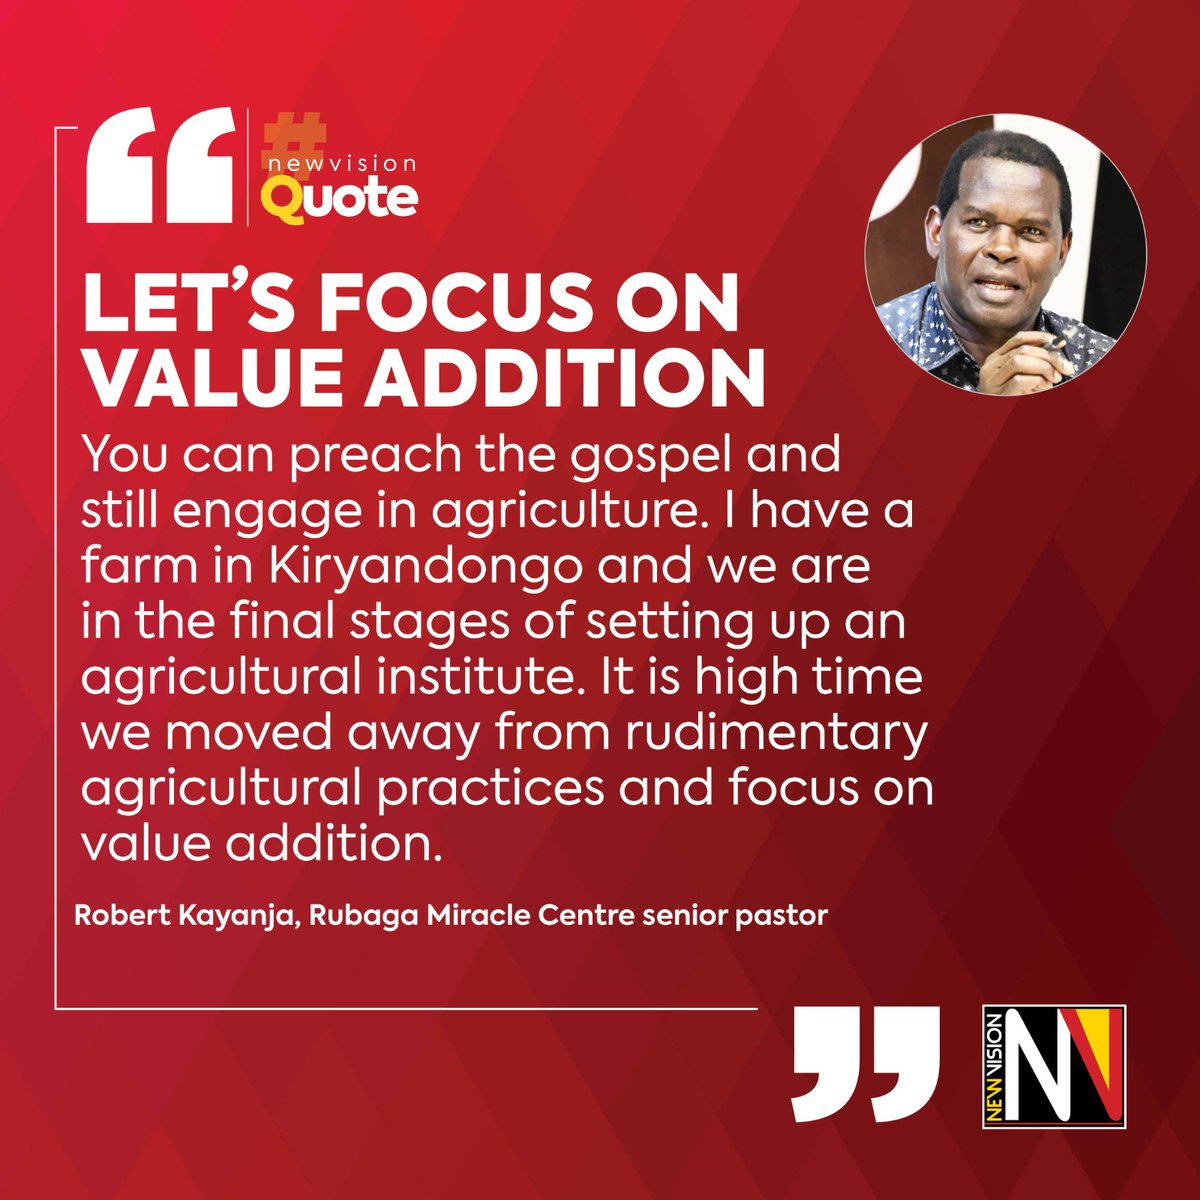 #NewVisionQuote 💬
It is high time we moved away from rudimentary agricultural practices and focus on value addition just like President Museveni preaches if we are to benefit from agriculture as a nation
@RobertKayanja 

Read more in our #EPAPER 🗞️👉🏿bit.ly/3d3acBF